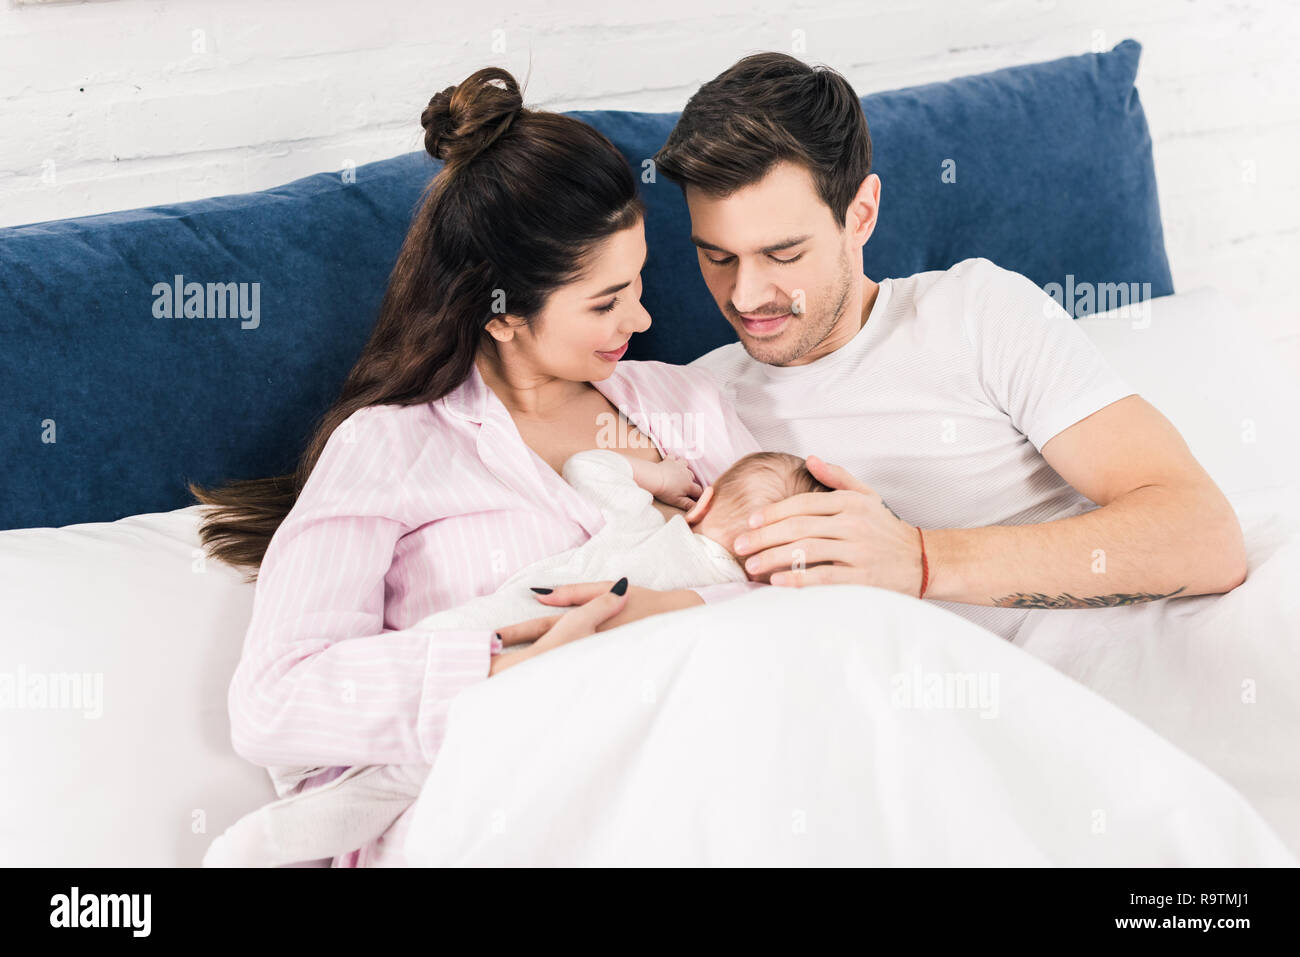 portrait of smiling mother breastfeeding little baby with husband near by on bed at home Stock Photo pic